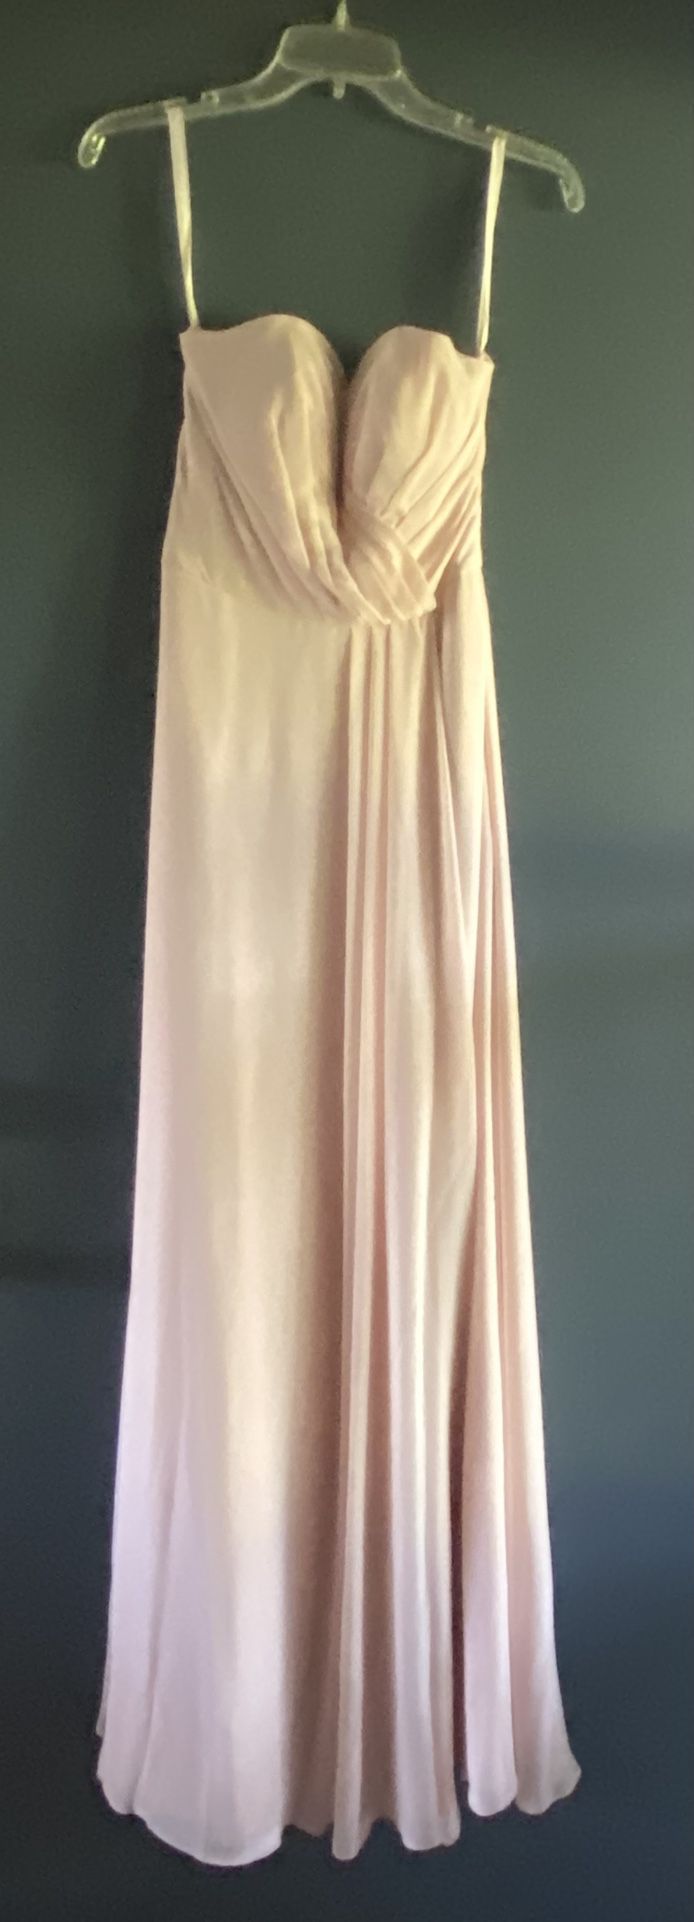 Strapless Chiffon Dress with Draped Sweetheart Neckline and Zipper Back (size 4)!